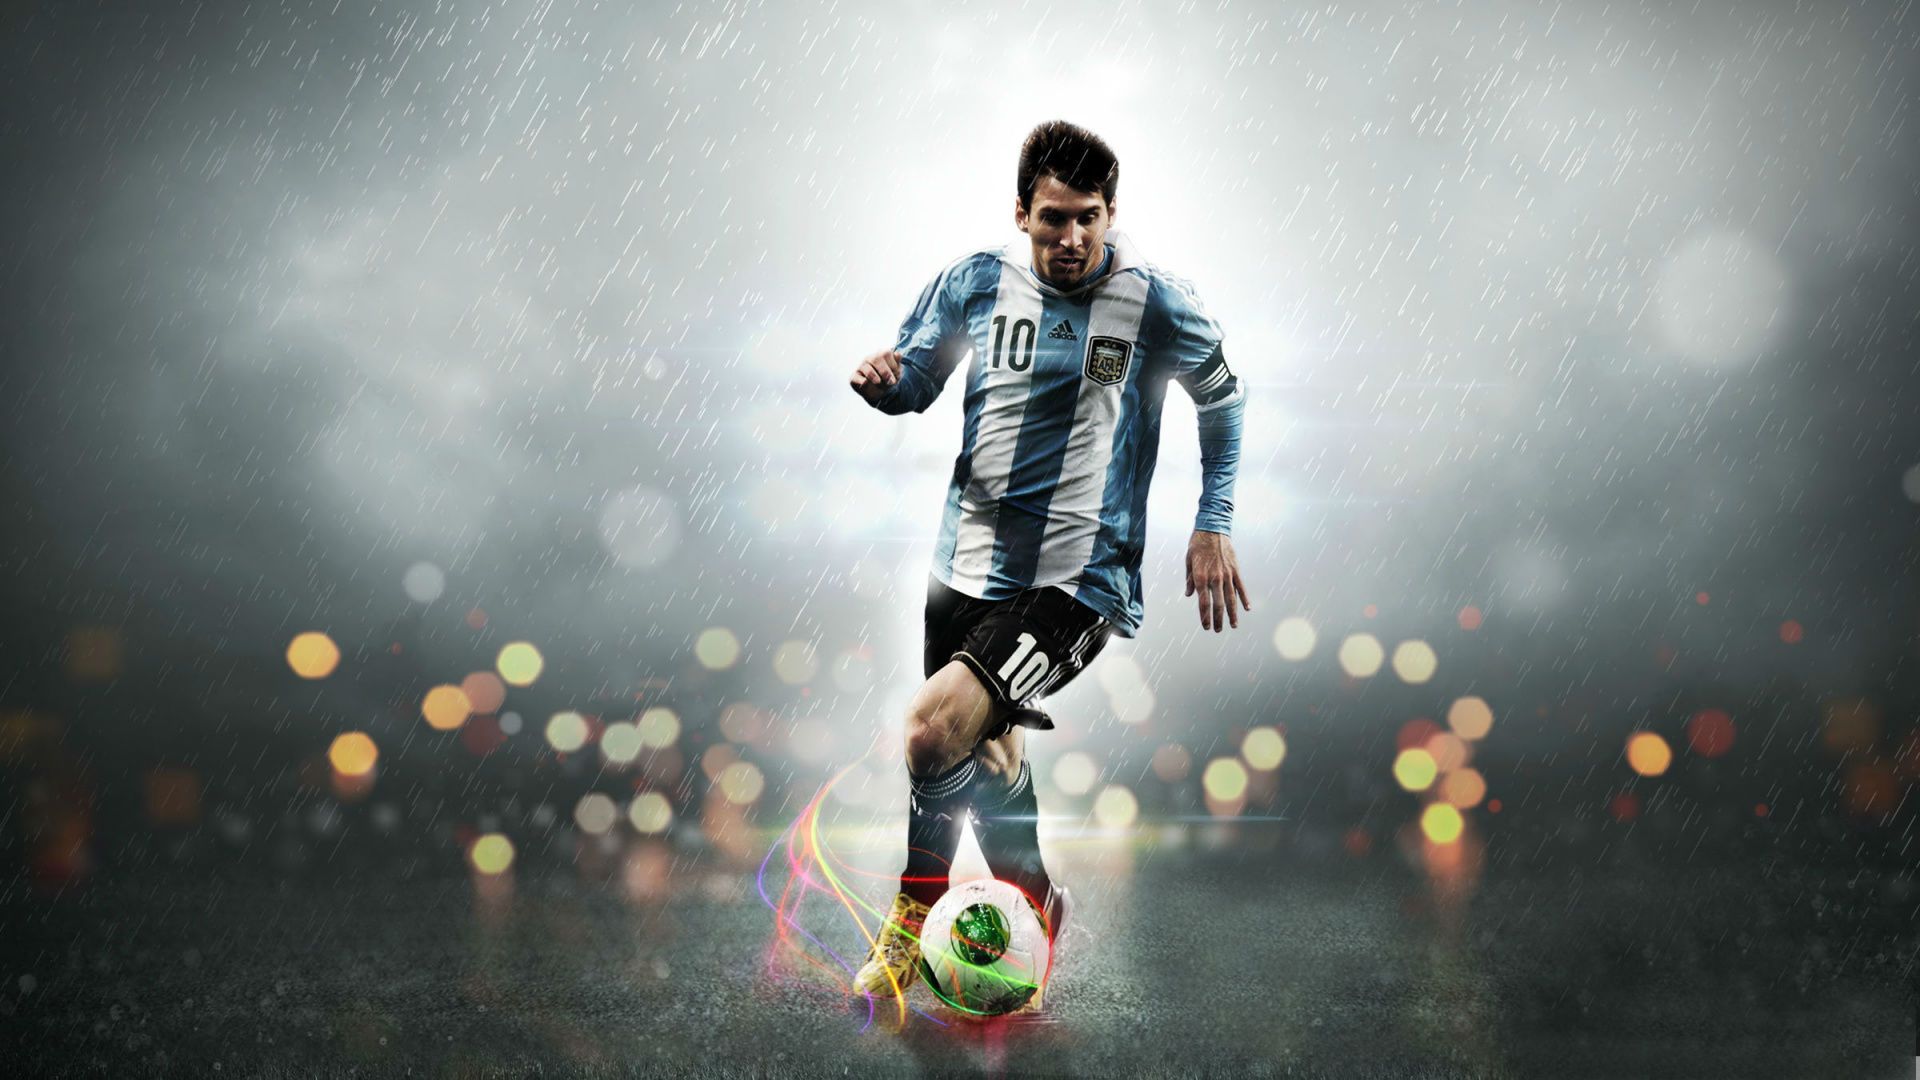 Soccer player wallpapers.